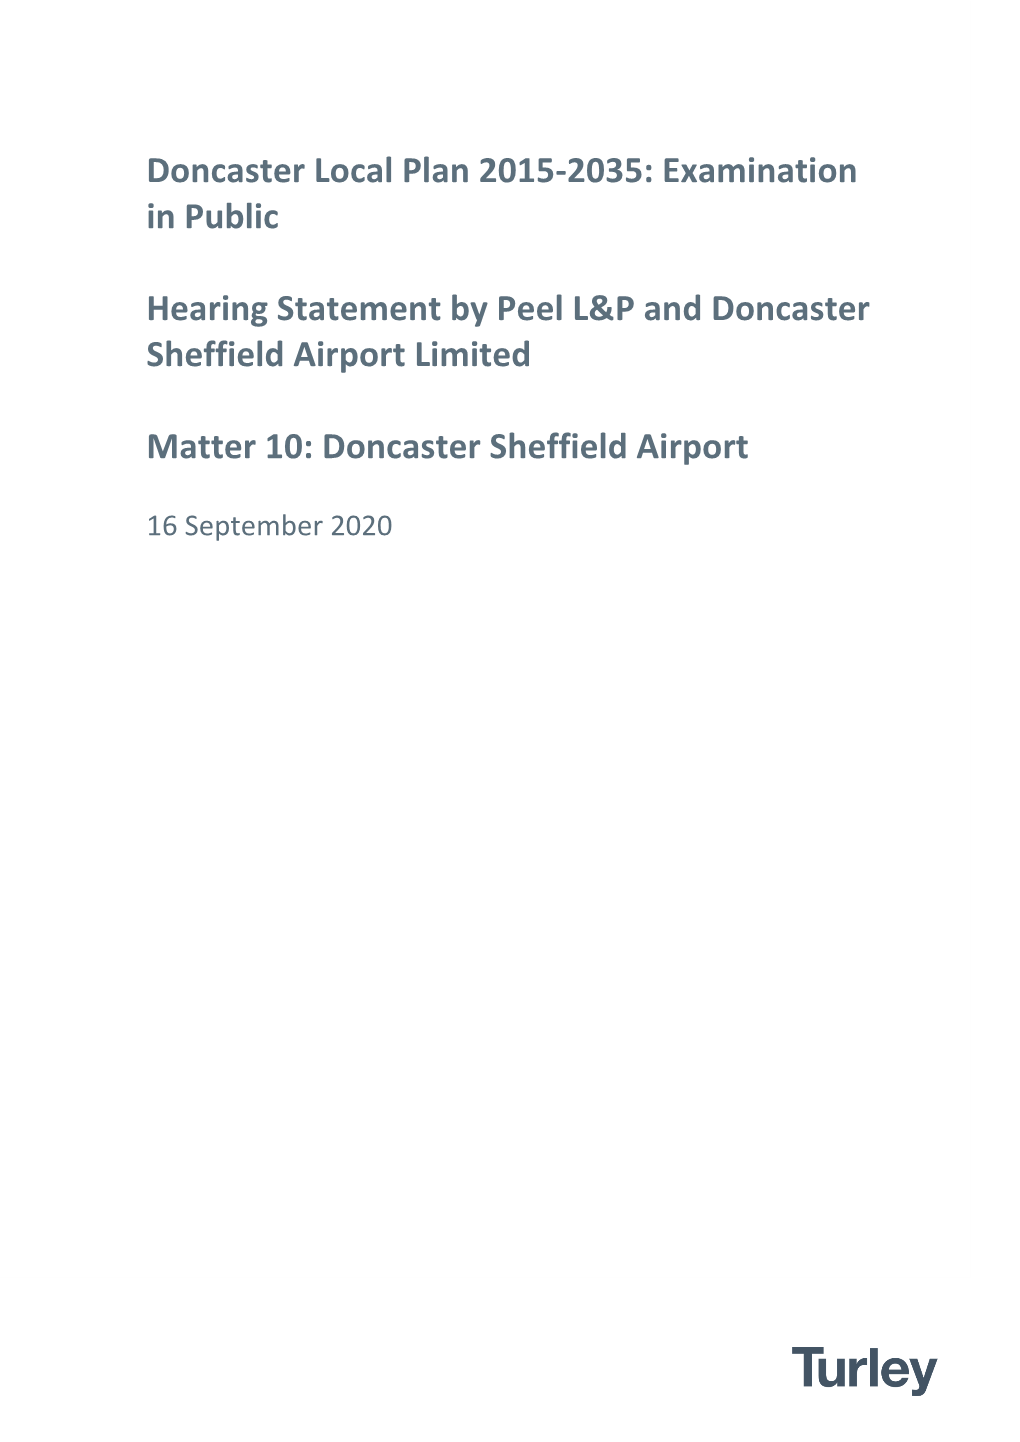 Doncaster Sheffield Airport Limited